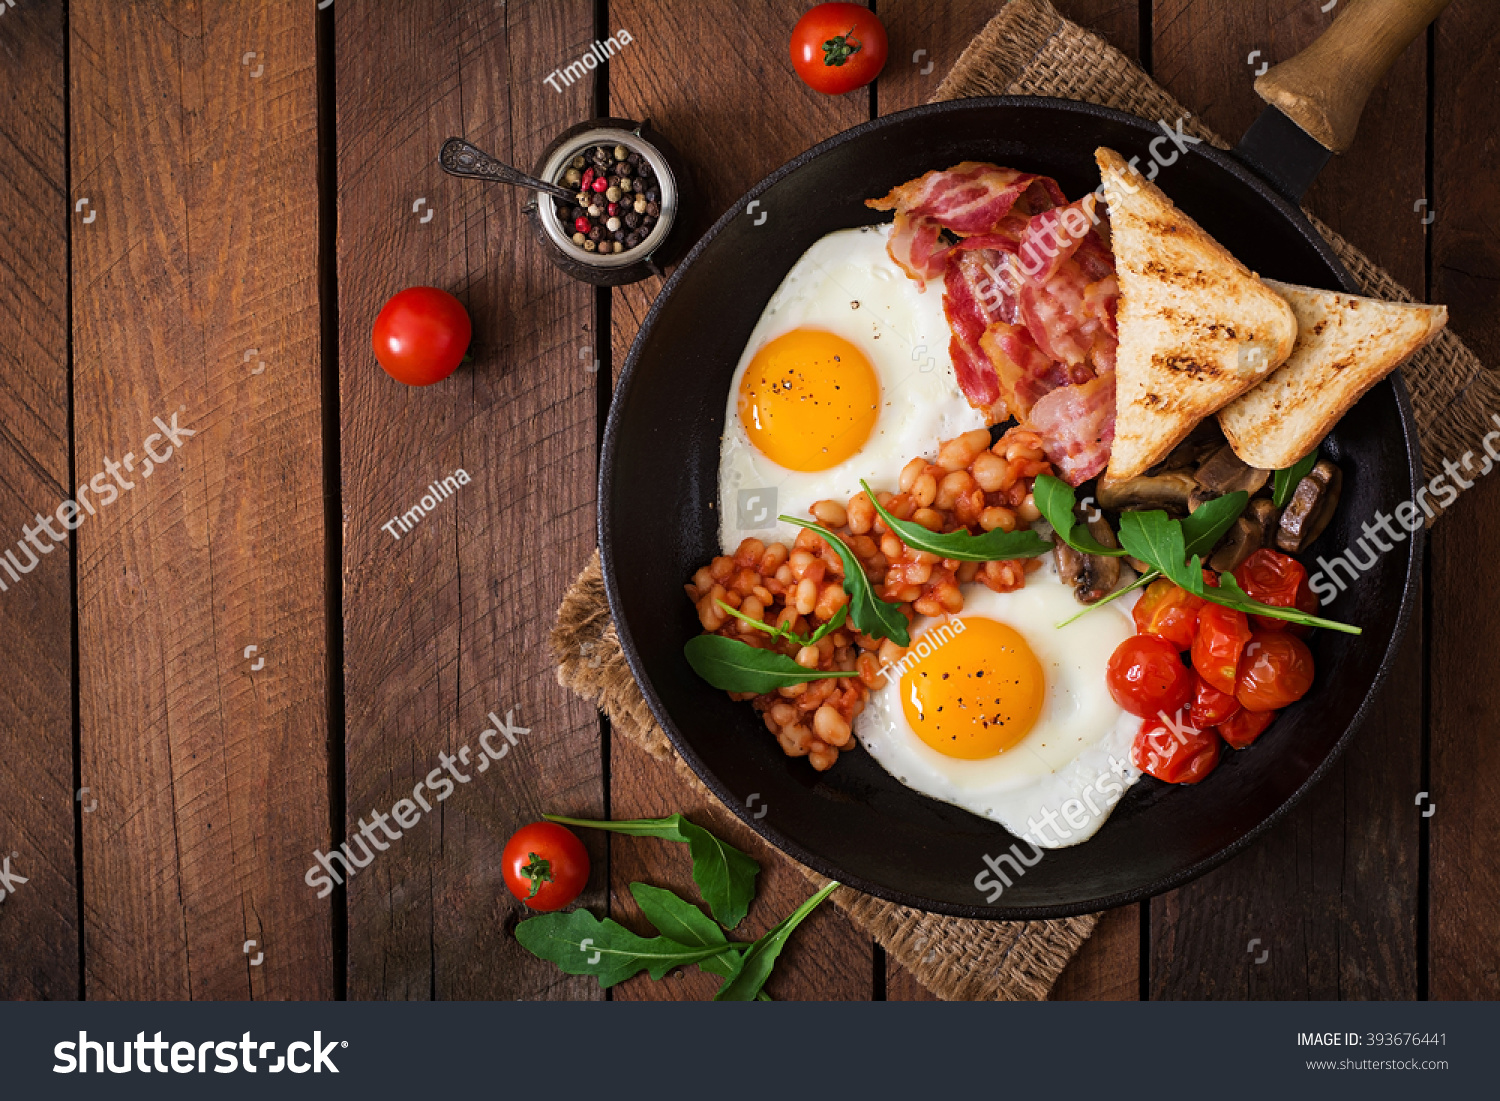 English breakfast - fried egg, beans, tomatoes, mushrooms, bacon and toast. Top view #393676441